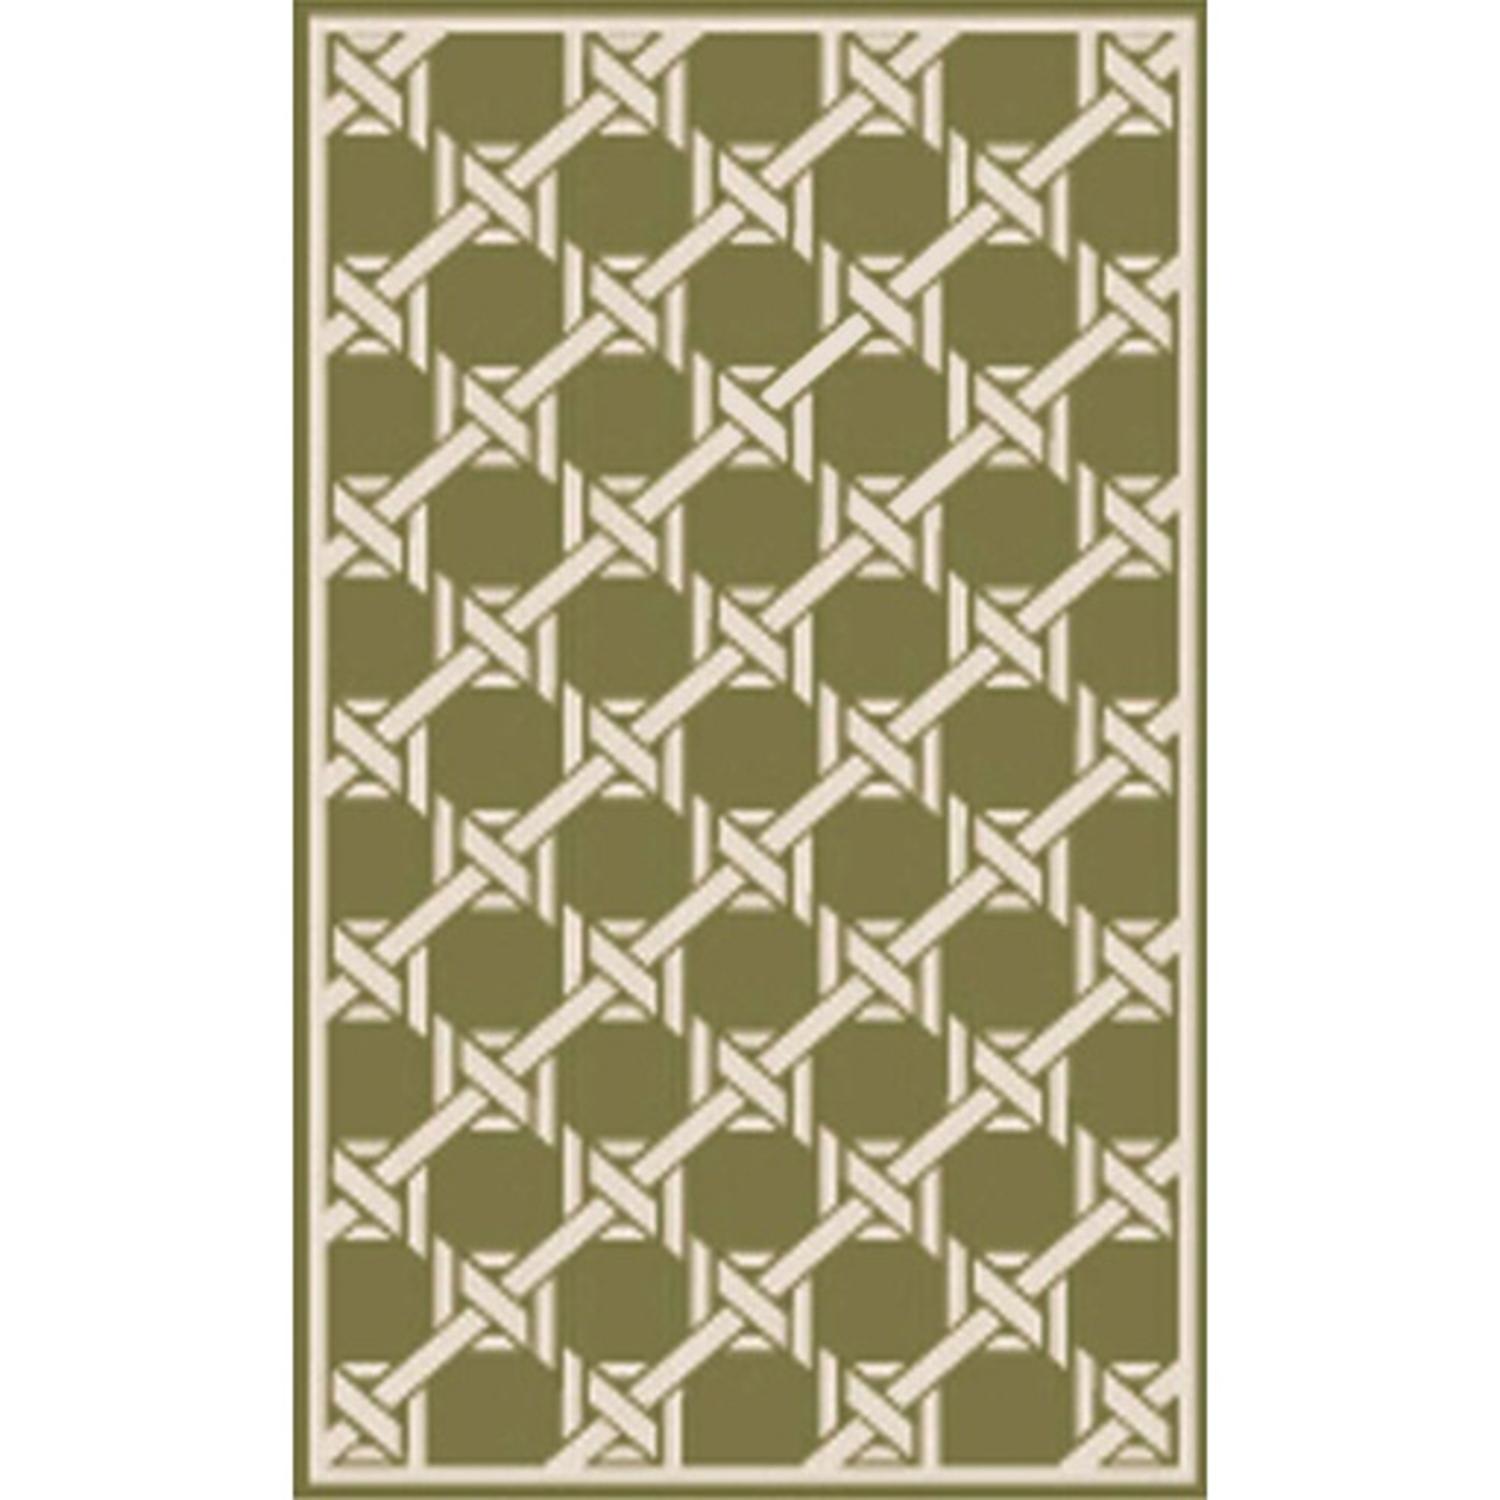 Diva At Home 2' x 3' Marlinspike Rapture Sage Green and Antique White Area Throw Rug